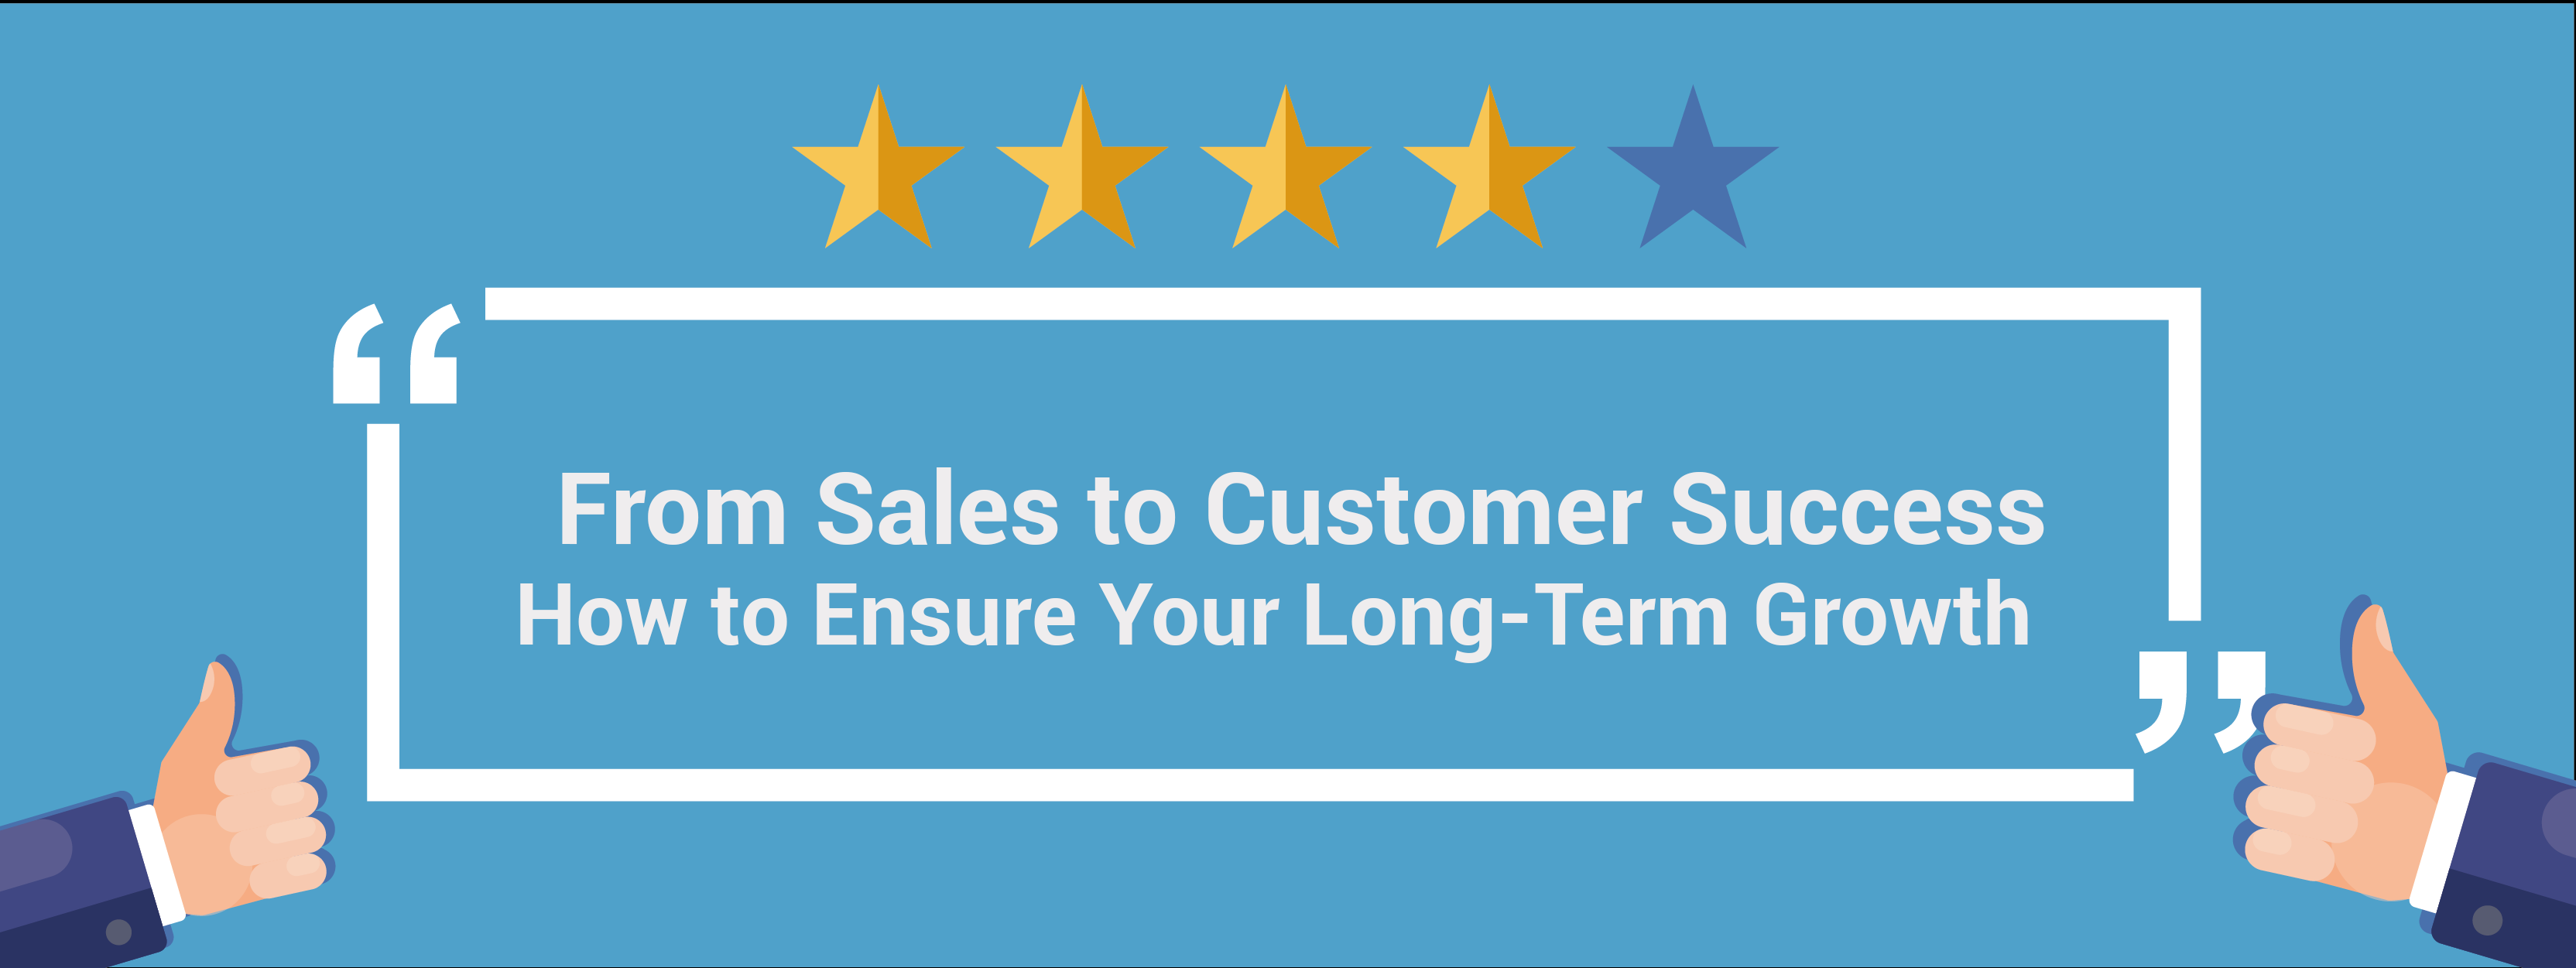 from sales to customer - how to ensure your long-term growth